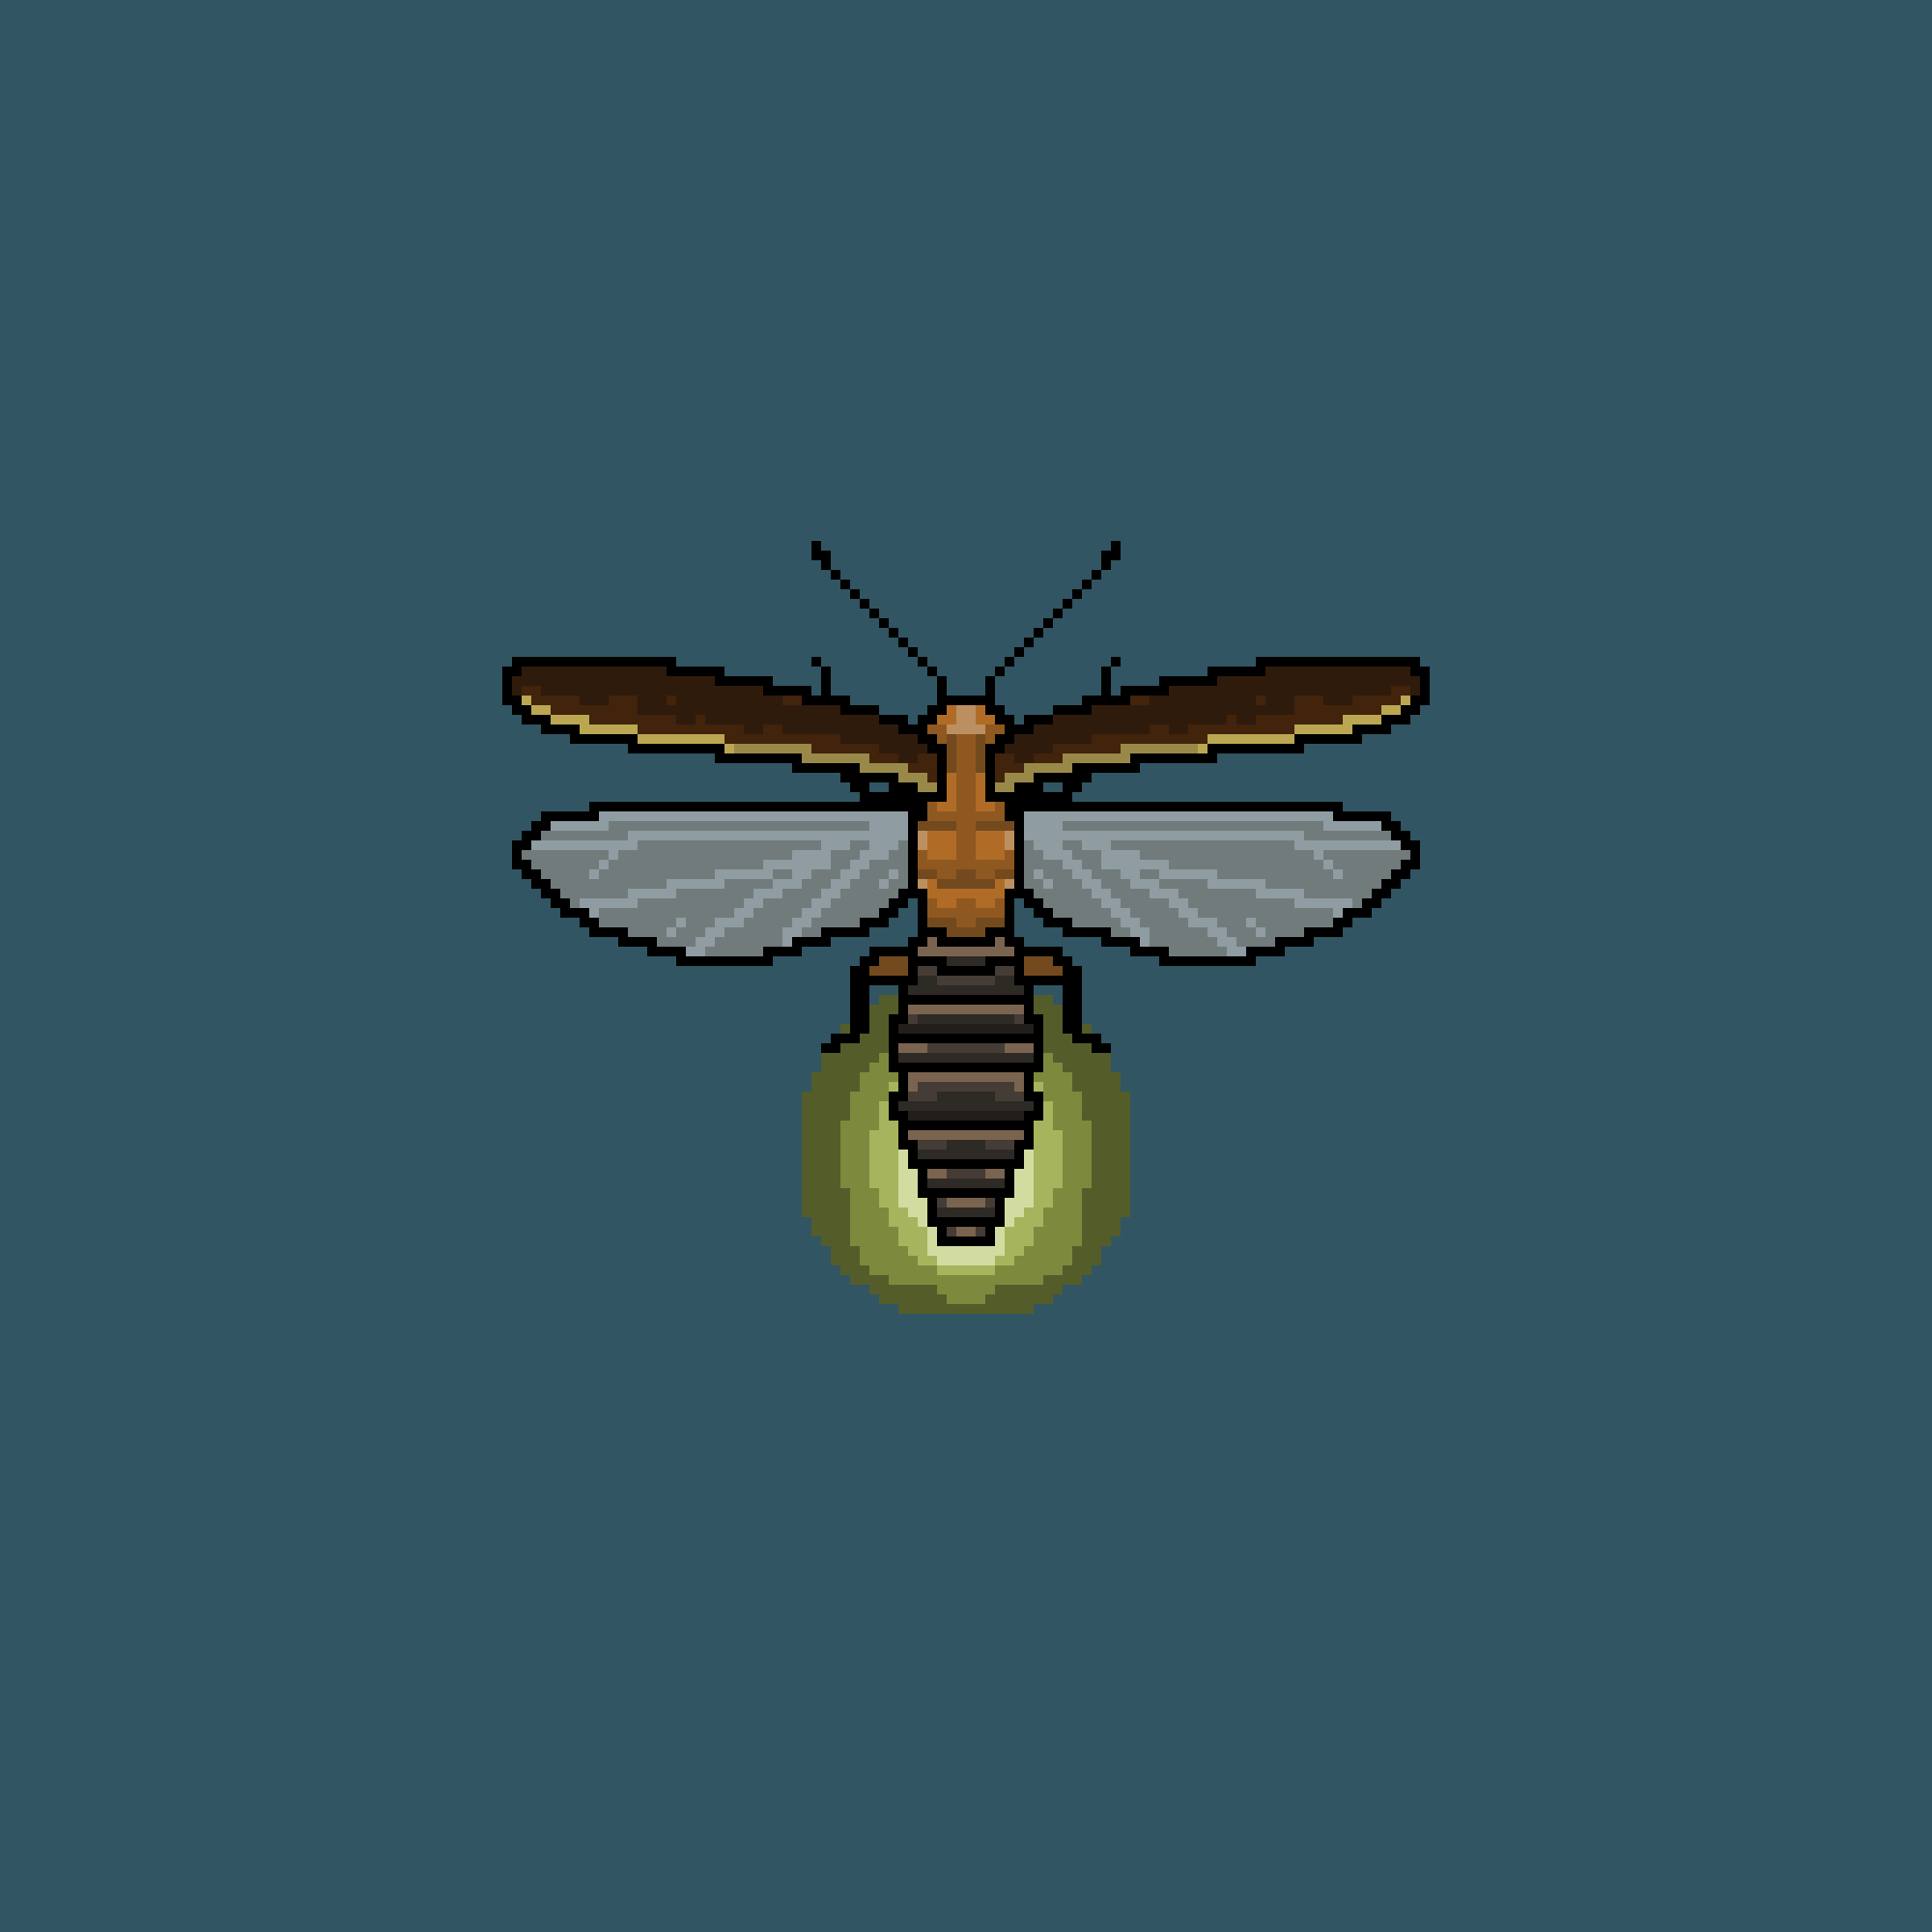 A Boring Firefly